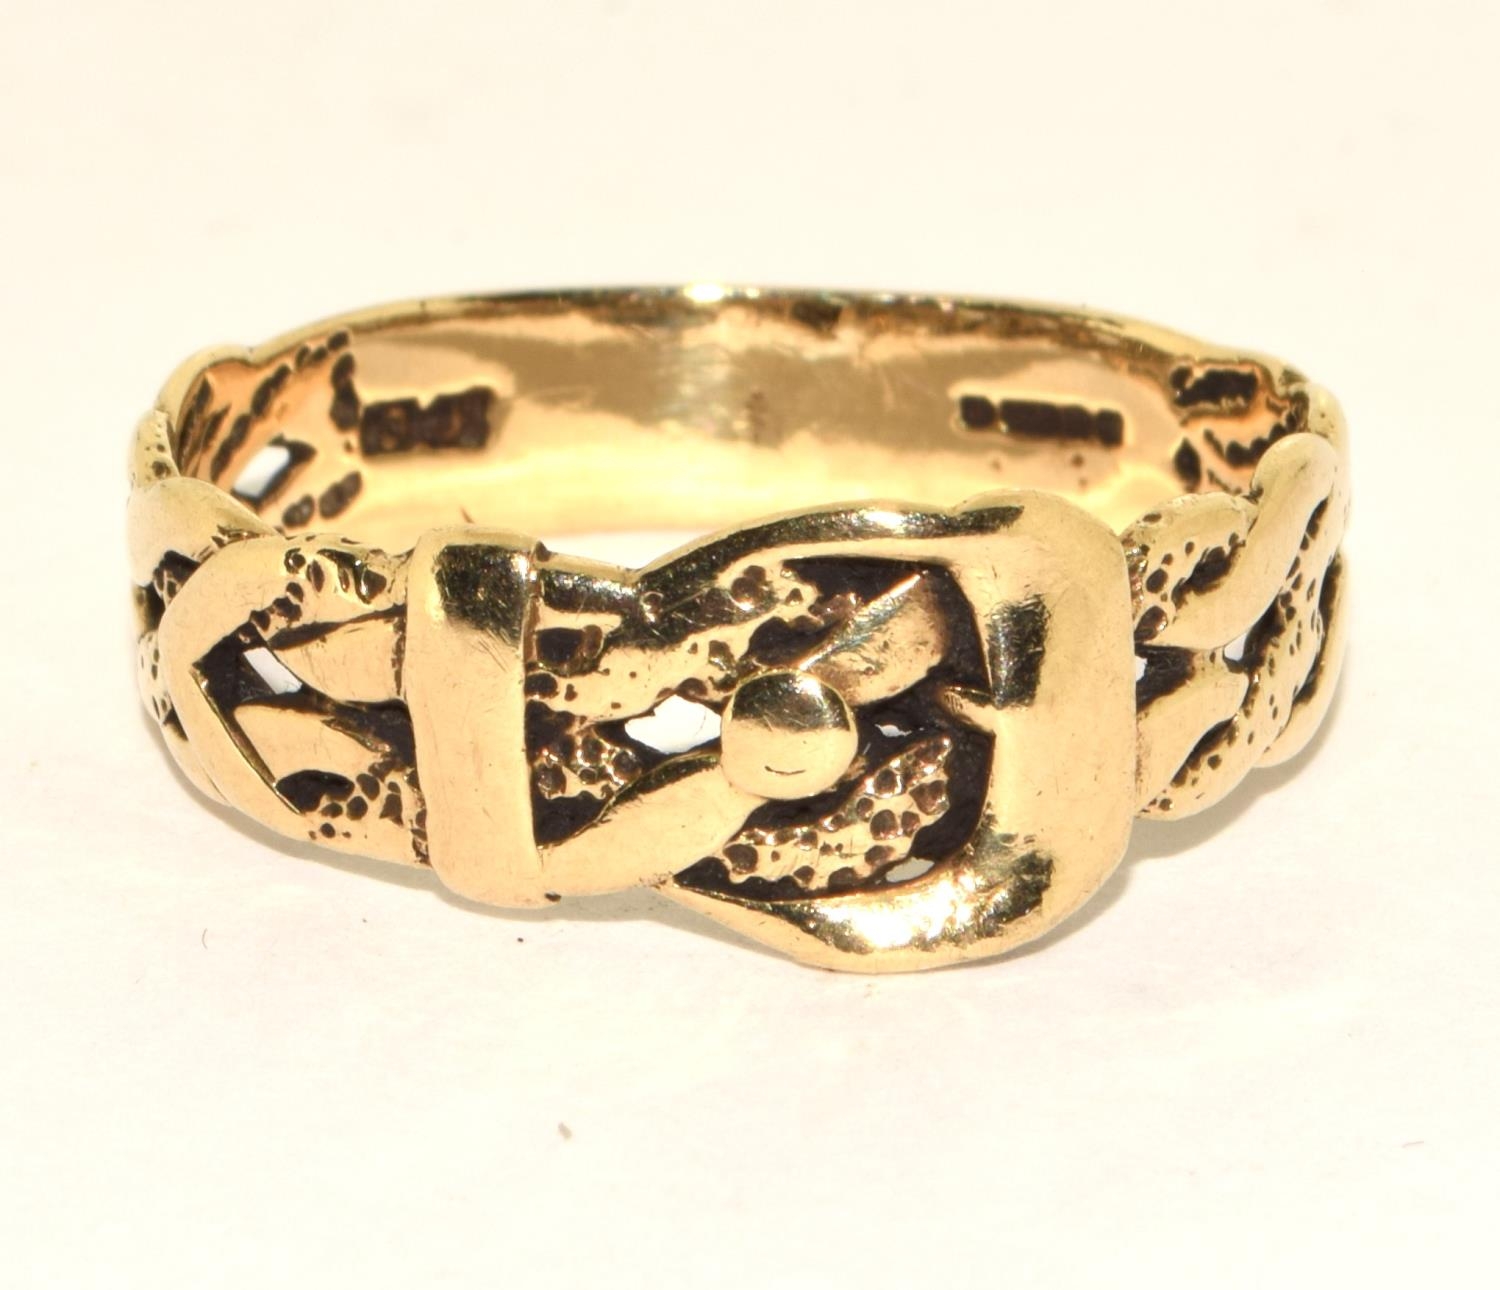 9ct gold gents buckle ring 3.8g size X